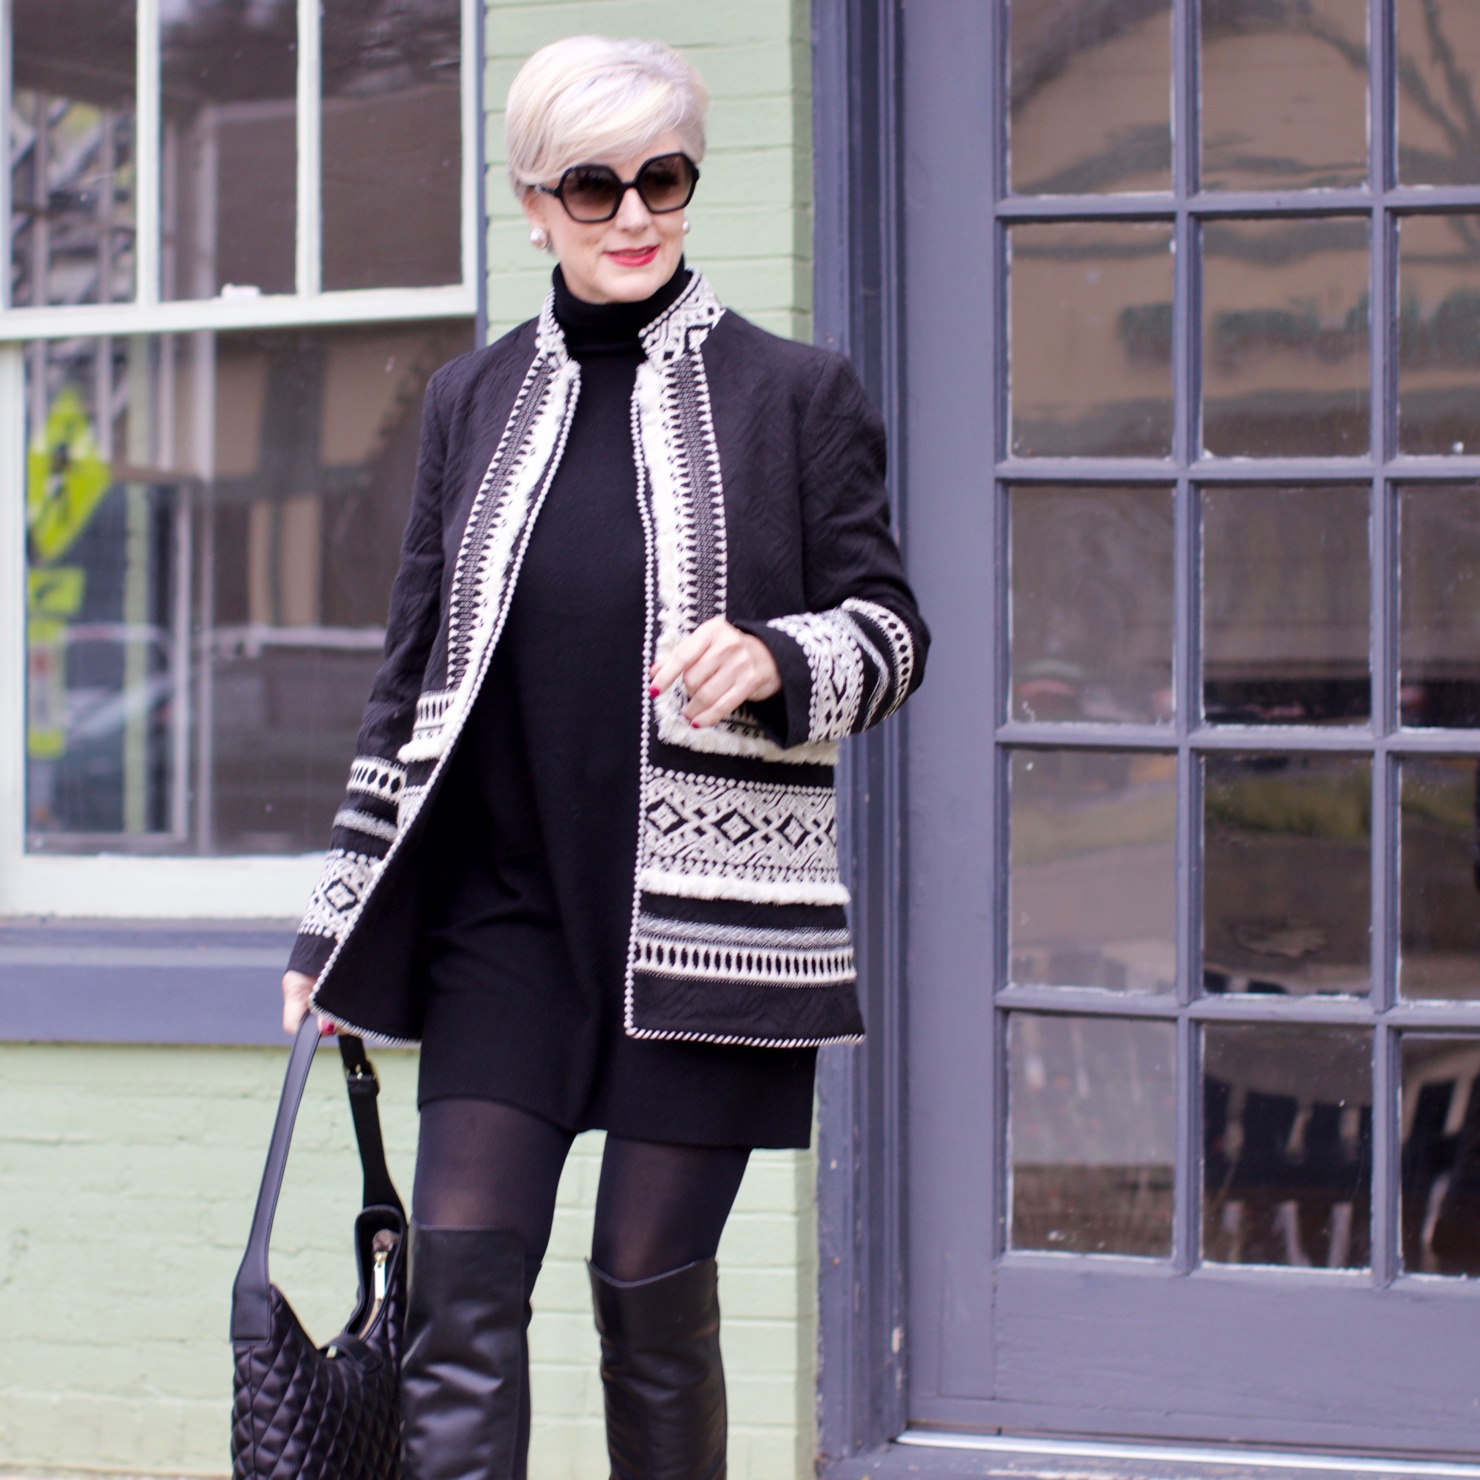 beth from style at a certain age wears a monochromatic outfit cashmere sweater dress from everlane, anthropologie embroidered jacket, black over the knee boots